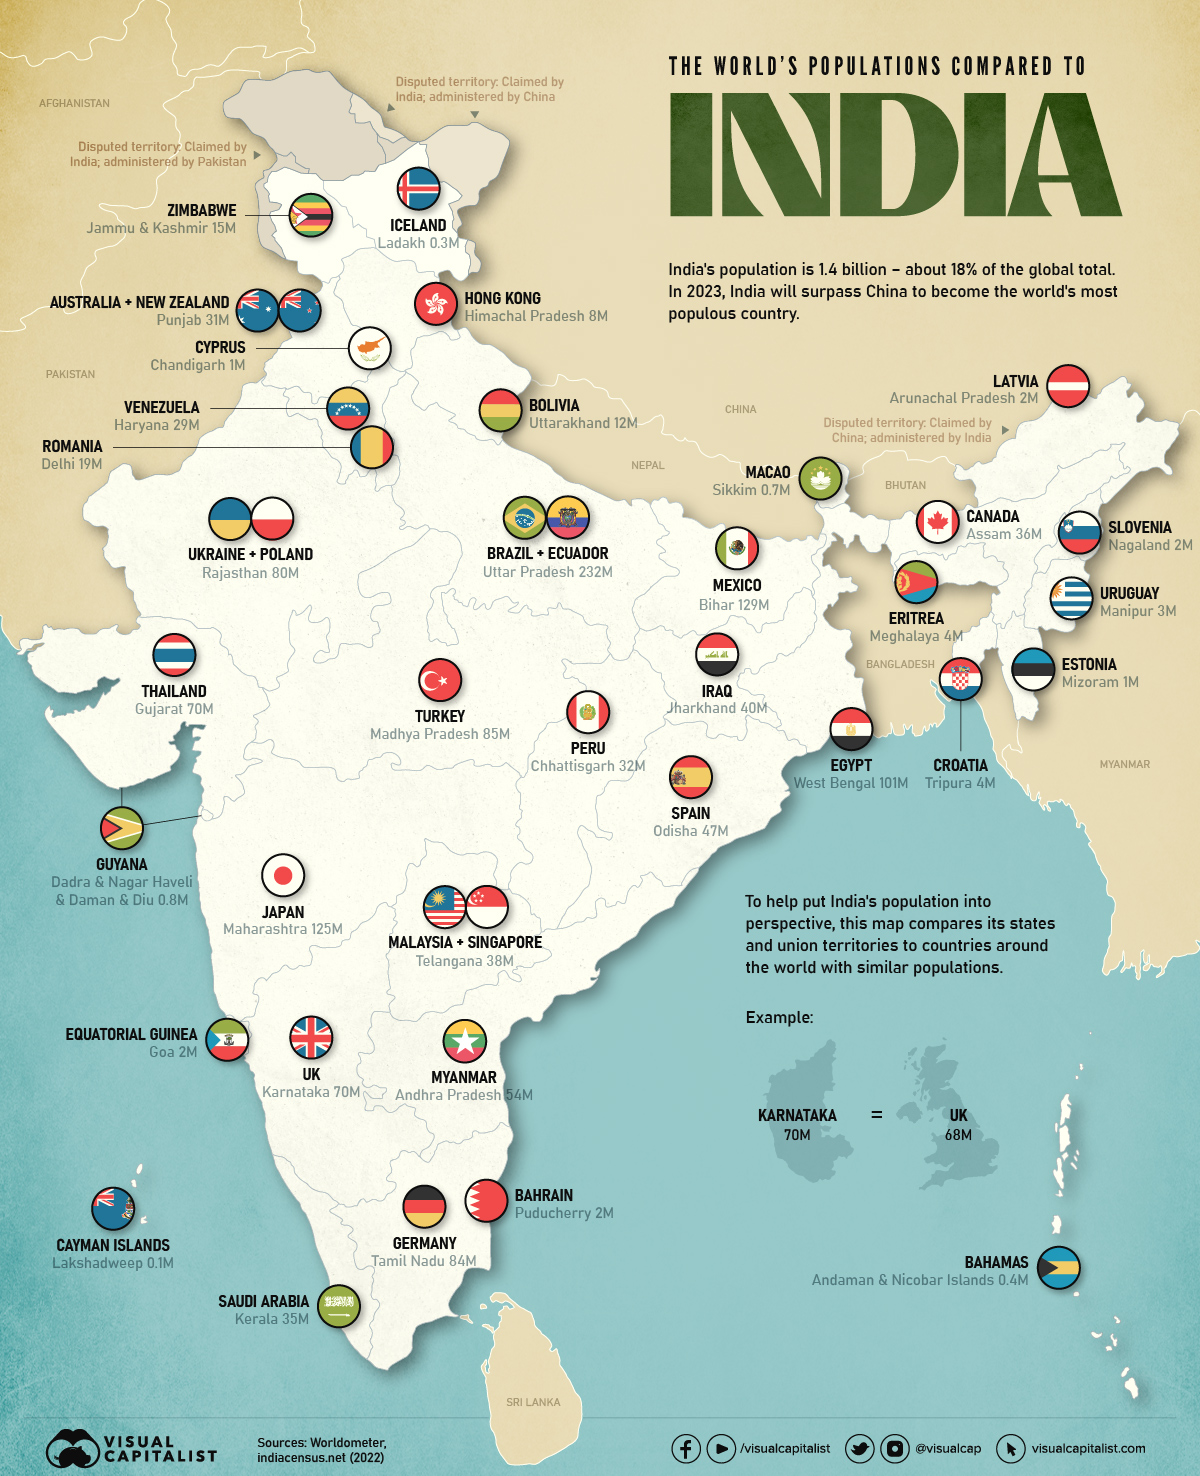 Indian States and Union Territories along with their Capitals 2022